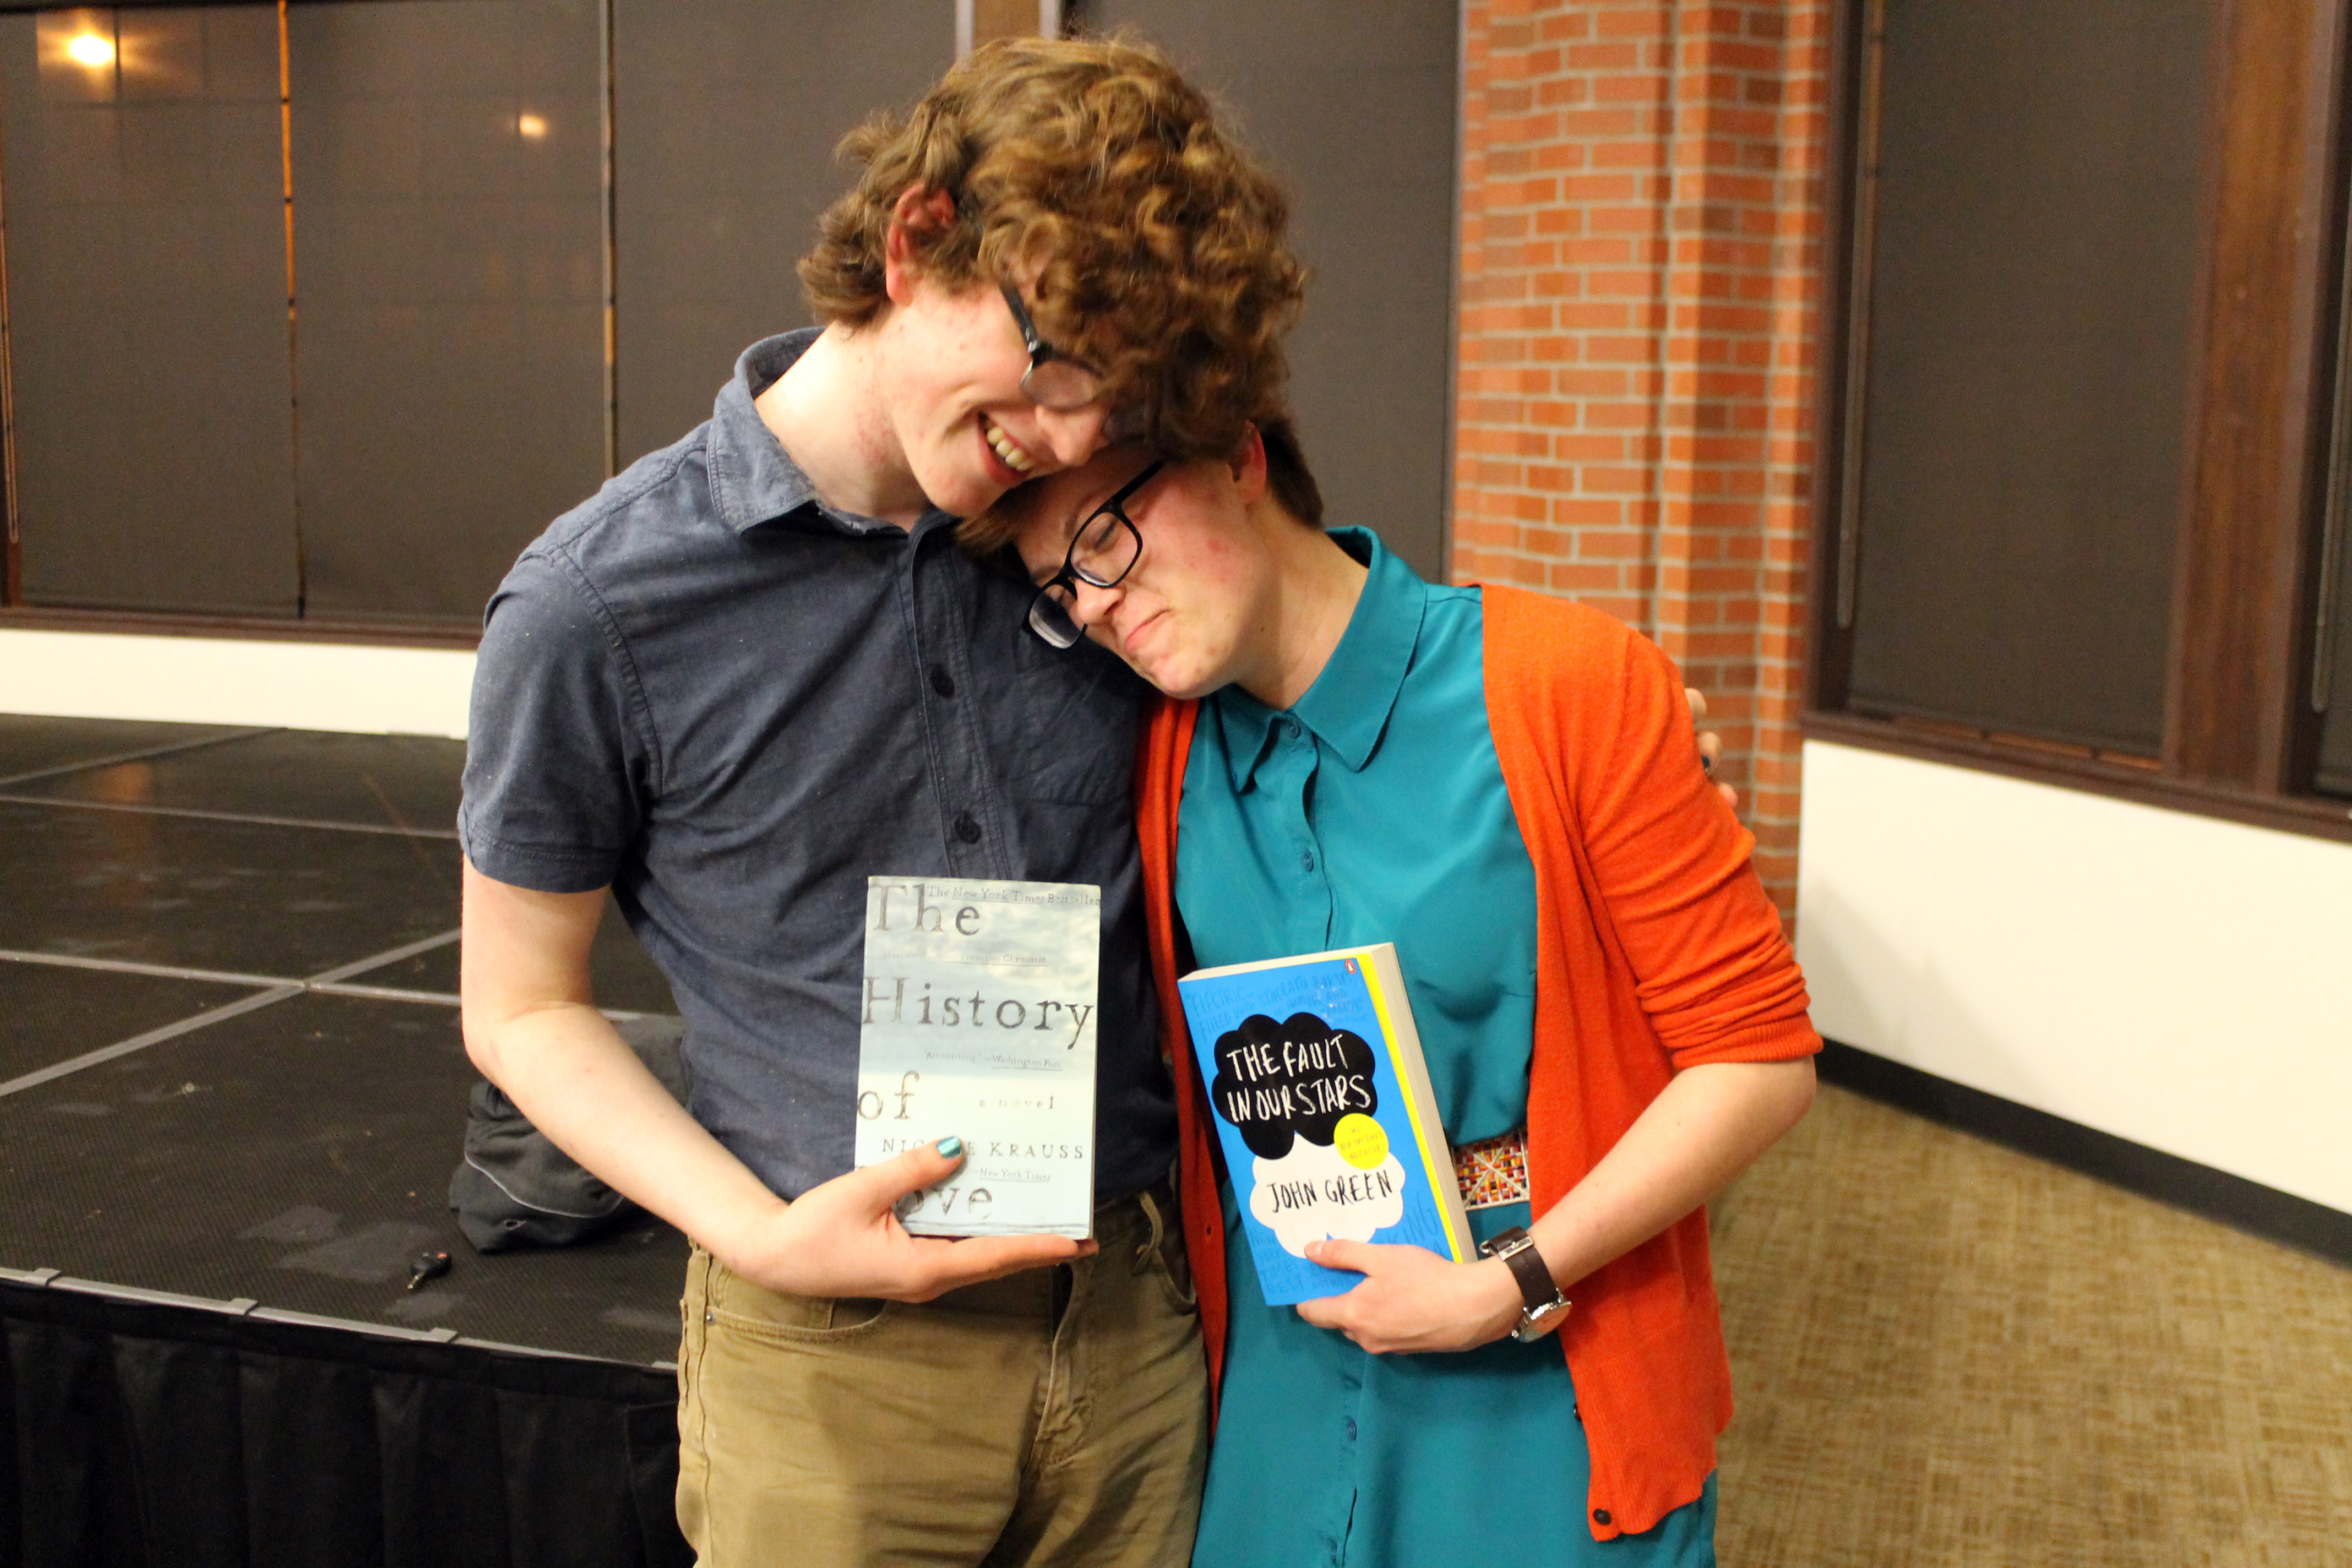 Chris Kelly and Nicole share a moment with their new books